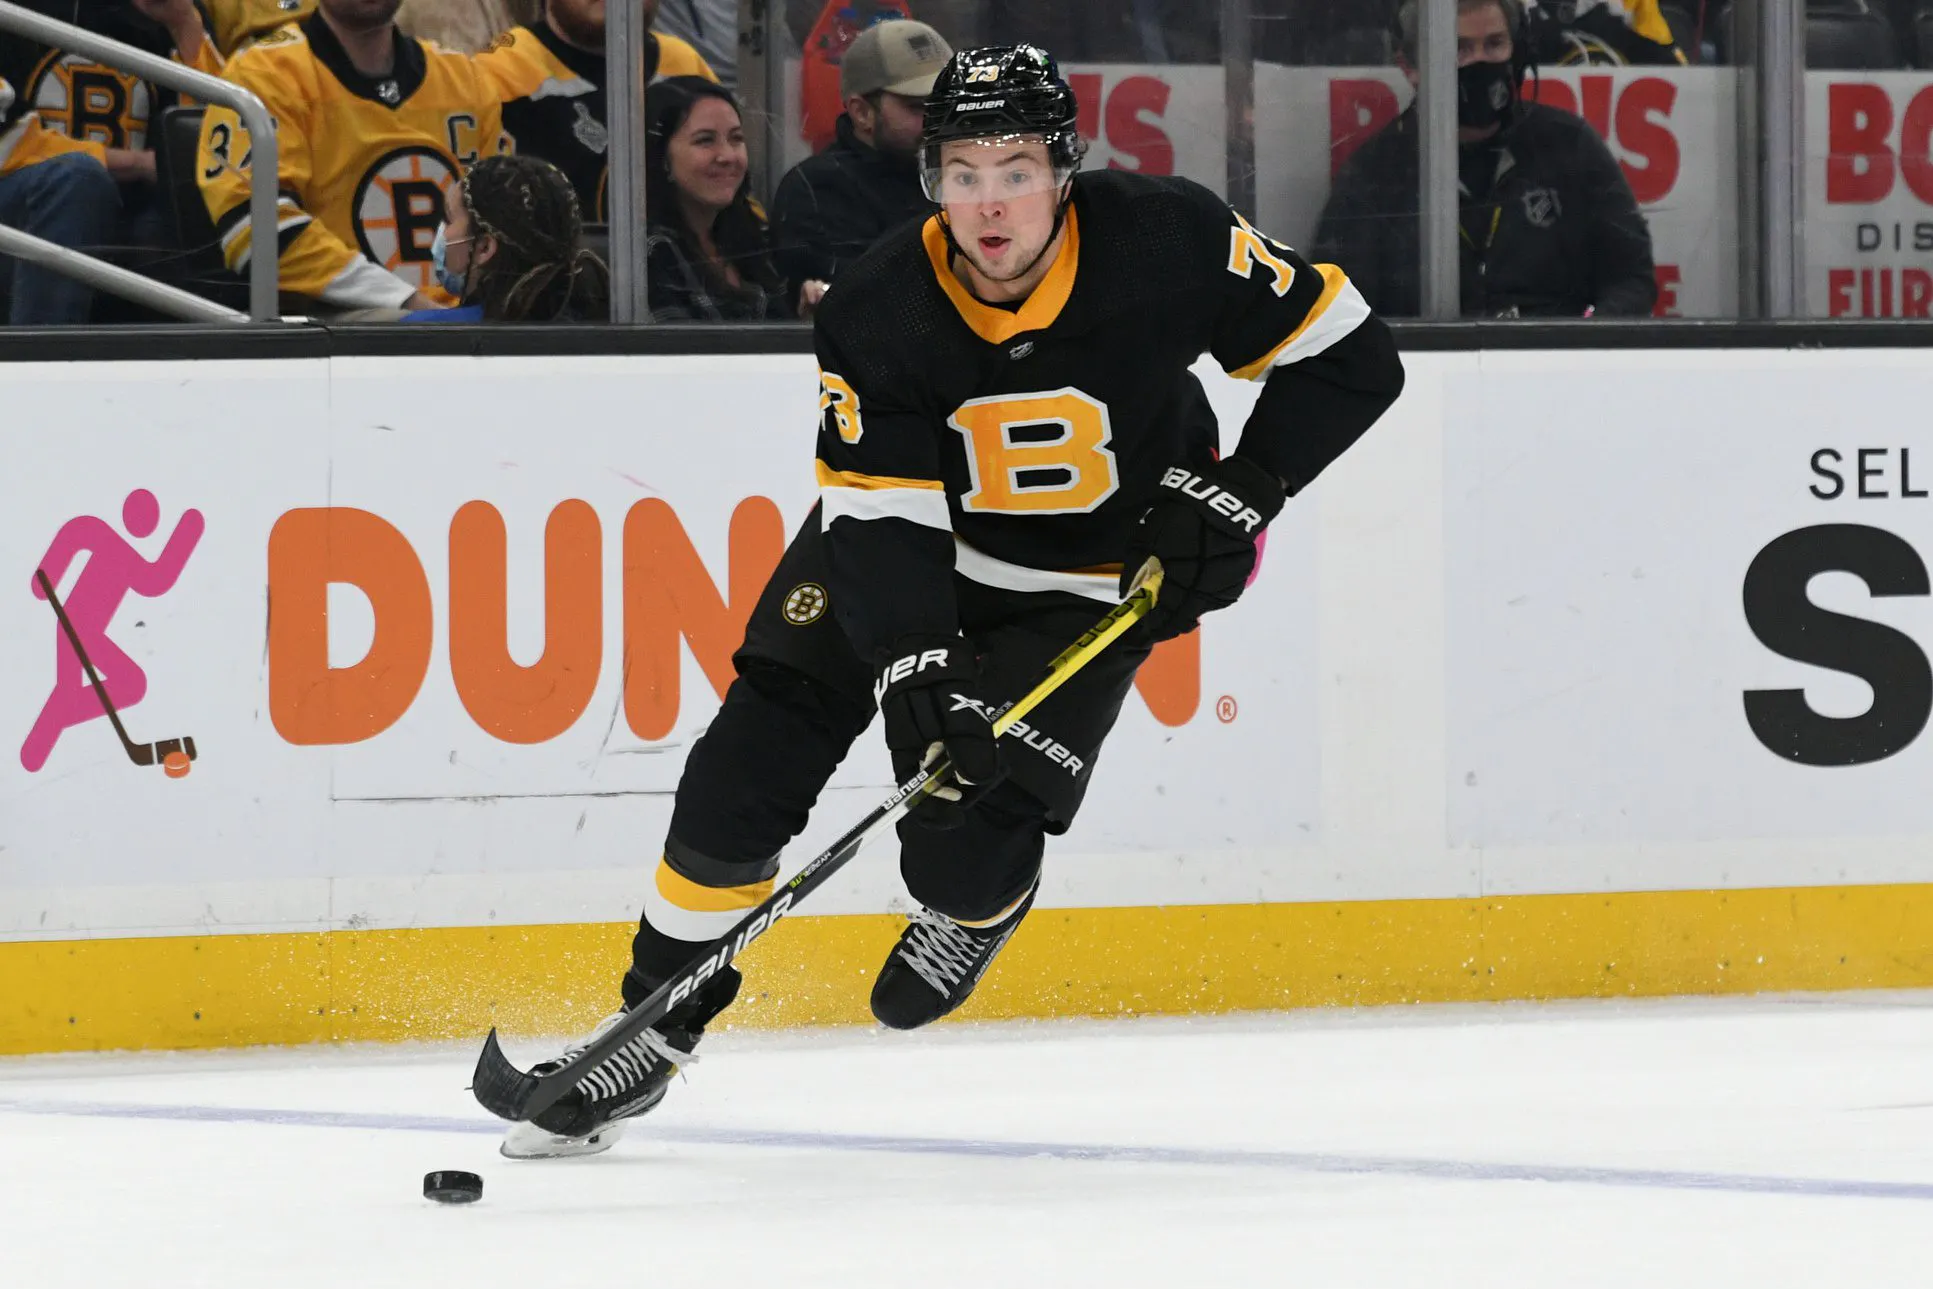 Bruins defenseman Charlie McAvoy expected to make 2022-23 debut Thursday